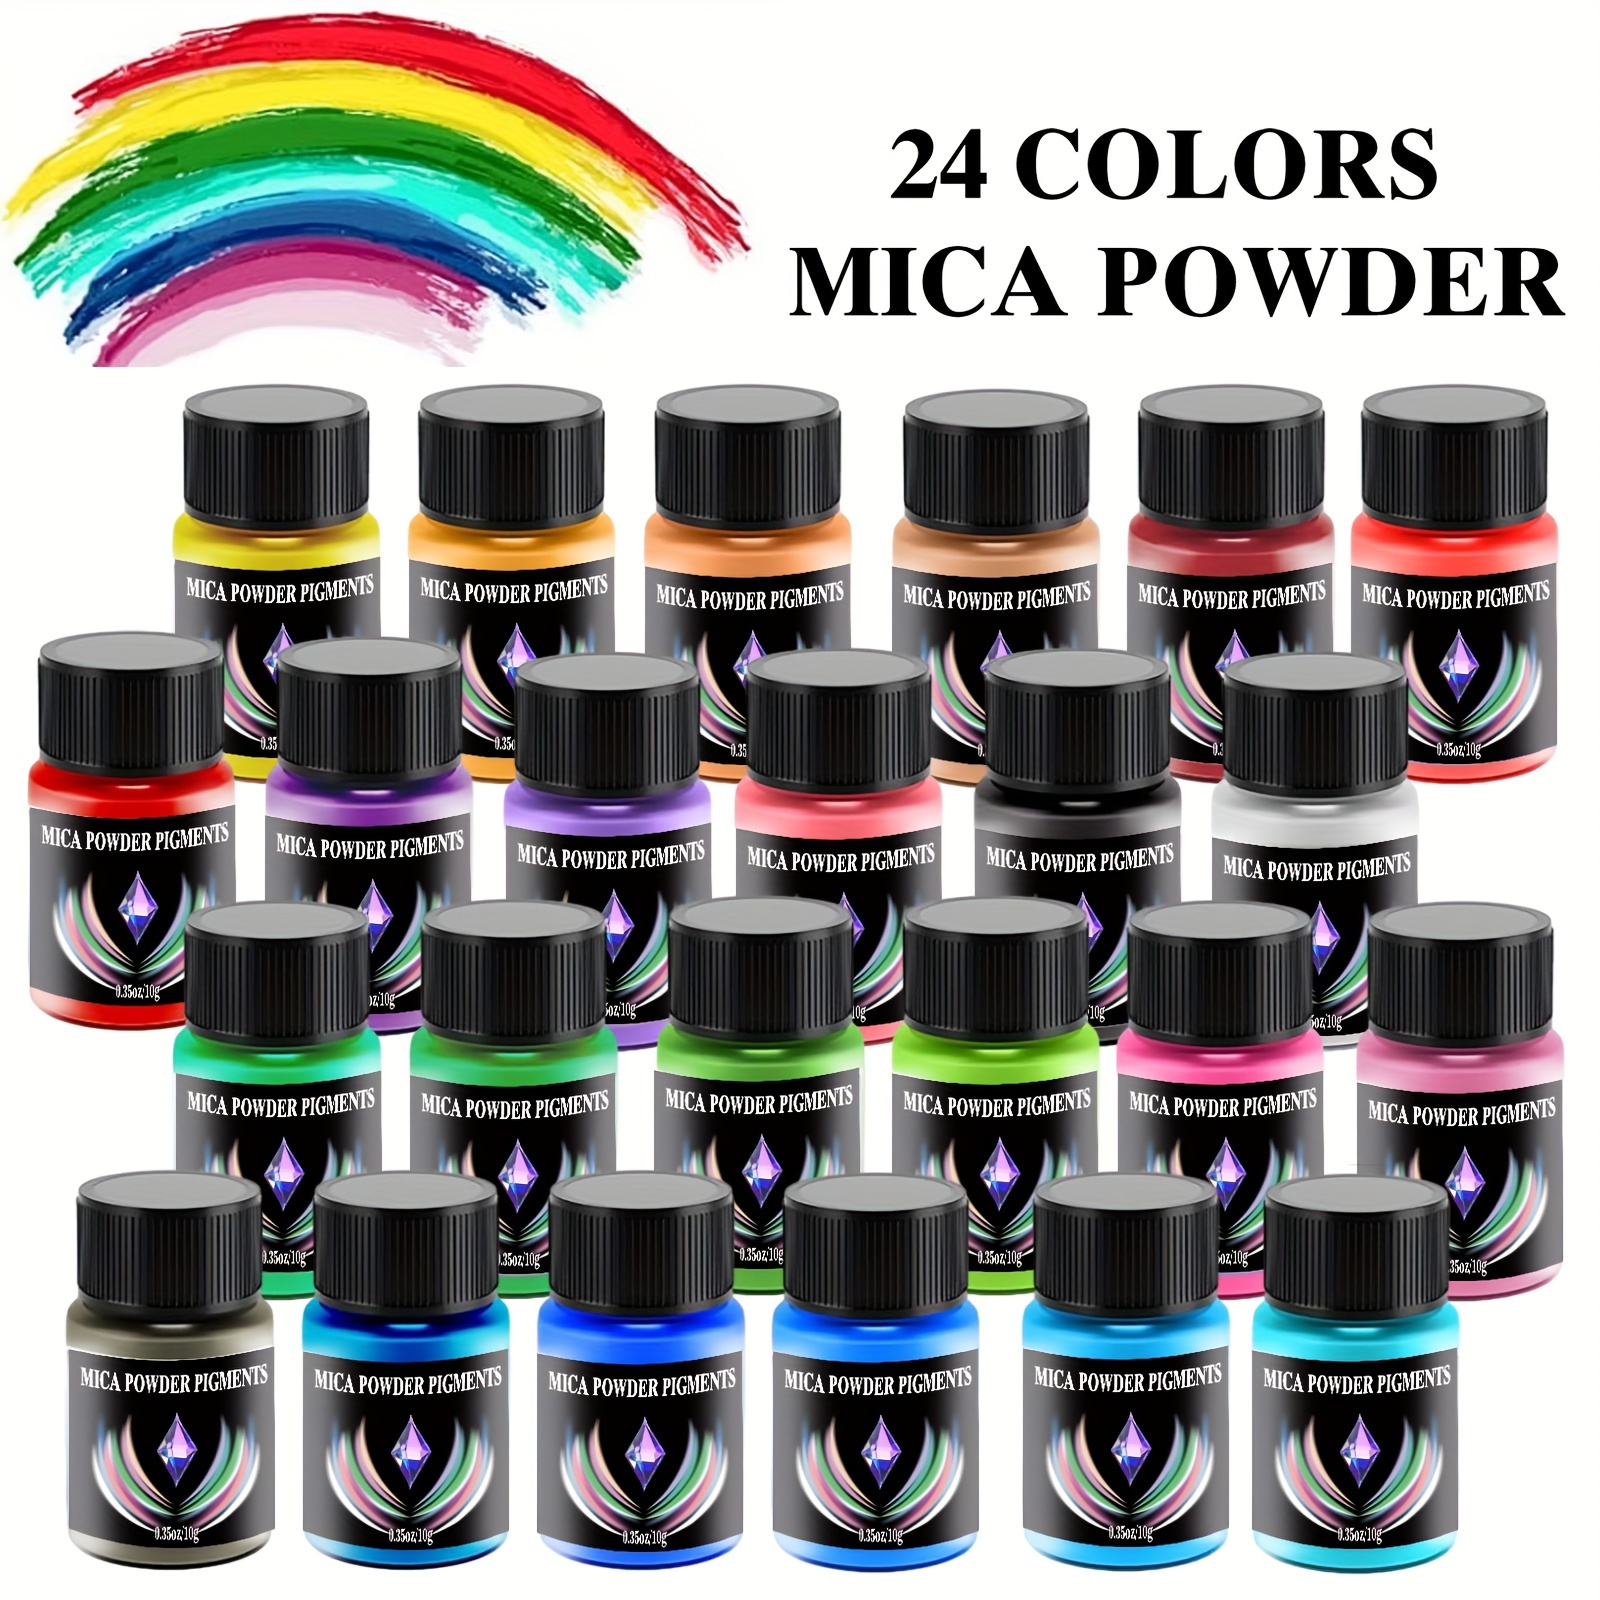 Fantastory Mica Powder for Epoxy Resin, 24 Colors Cosmetic Grade Resin  Pigment Powder(0.35oz/10g), Incl. 5 Jars Glitter Mica Powders for Candle  Making, Car Freshies, Soap, Bath Bomb, Crafts, Slime